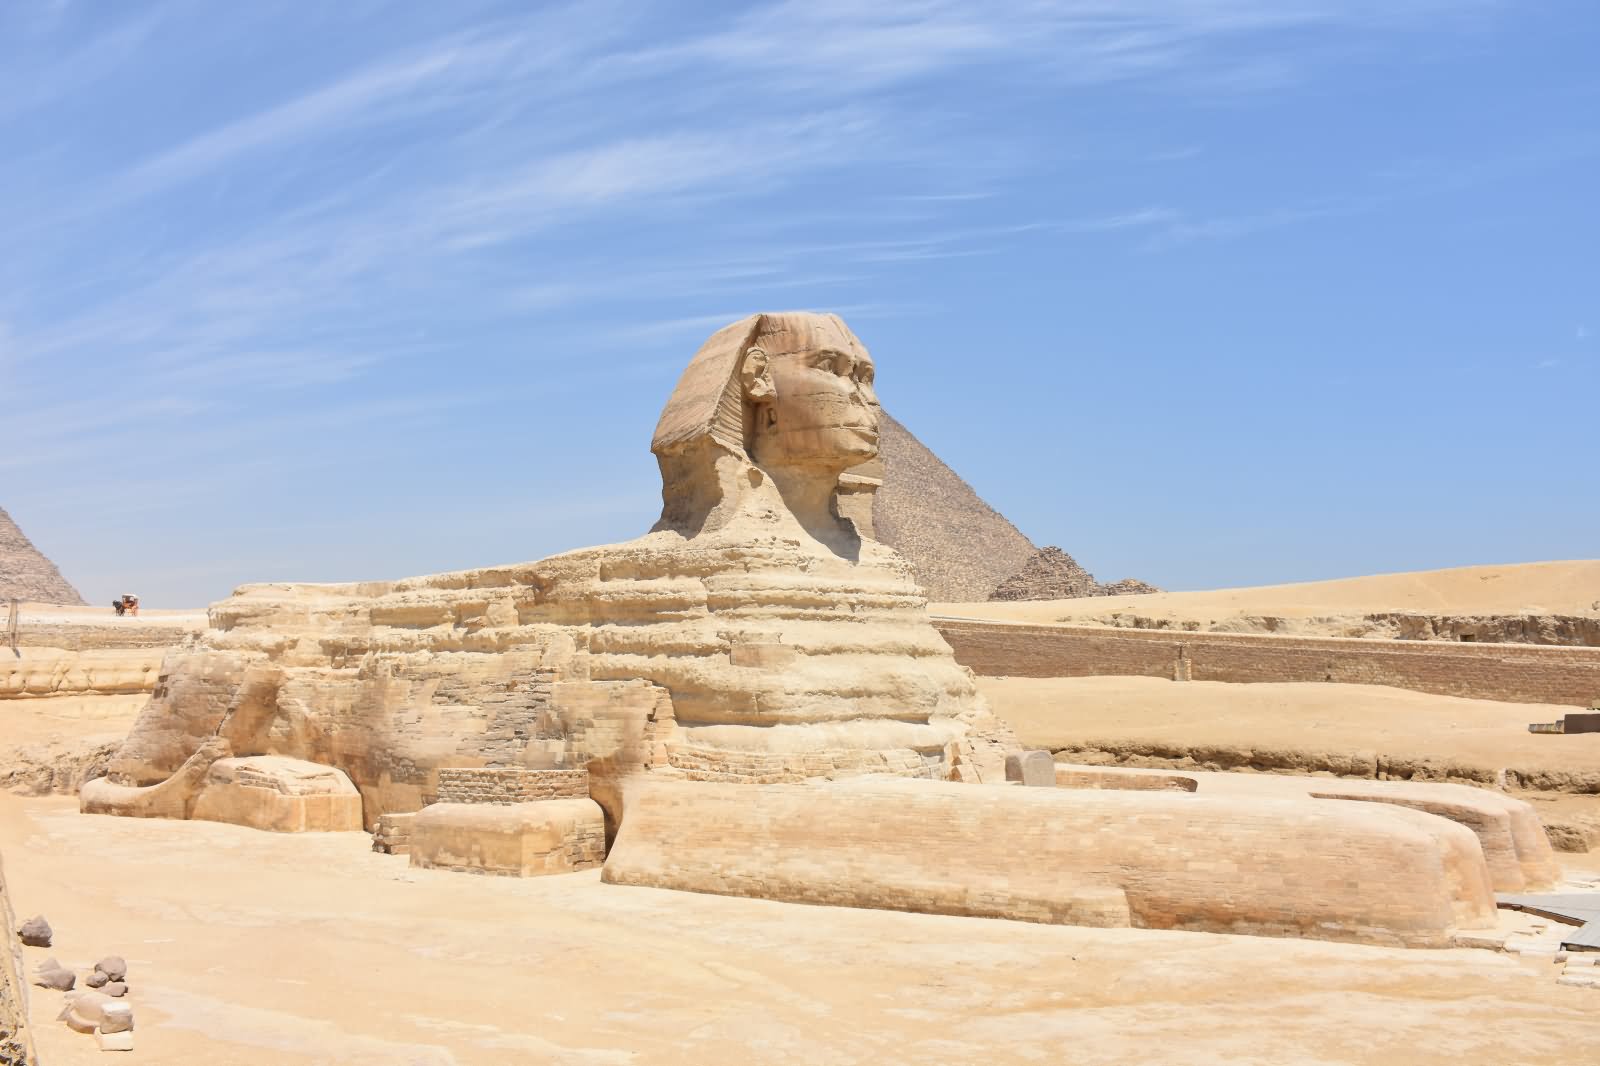 Beautiful Picture Of The Great Sphinx of Giza, Egypt